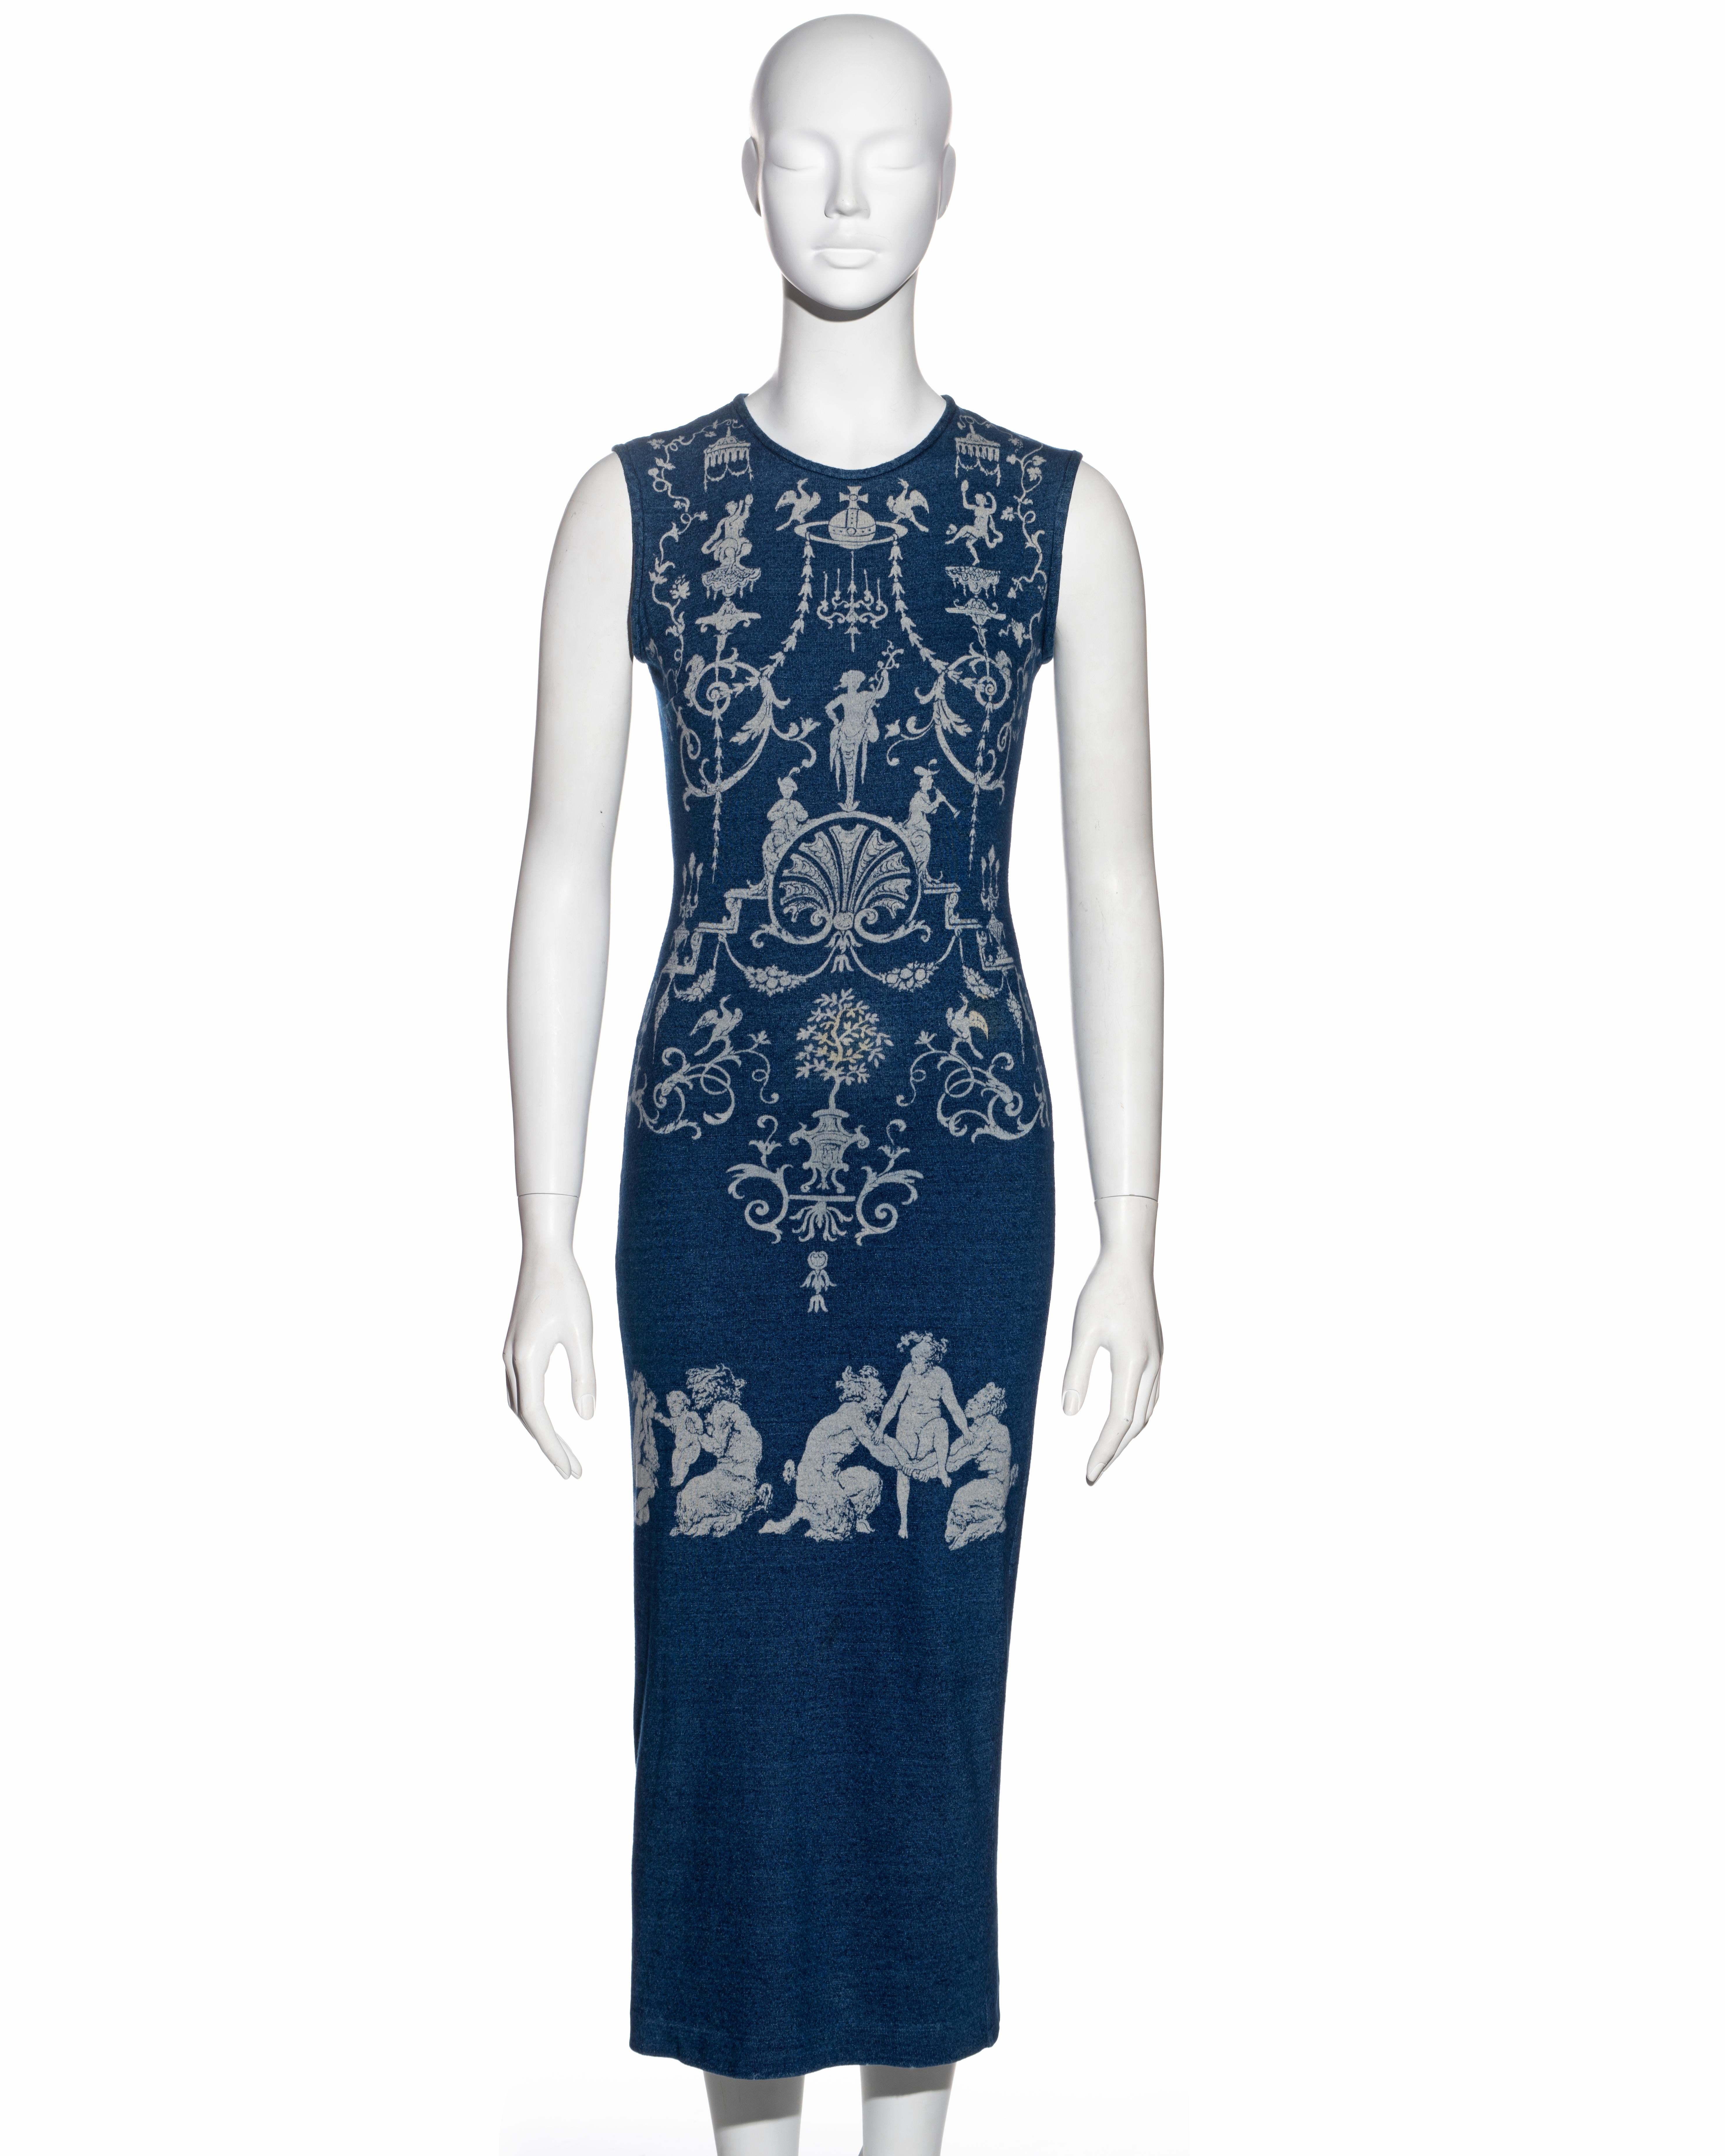 ▪ Vivienne Westwood dress 
▪ Sold by One of a Kind Archive
▪ Constructed from indigo cotton jersey 
▪ Neoclassical print inspired by Andre-Charles Boulle
▪ Bodycon fit 
▪ Size approx. Small - Medium
▪ Spring-Summer 1991
▪ Made in England

All